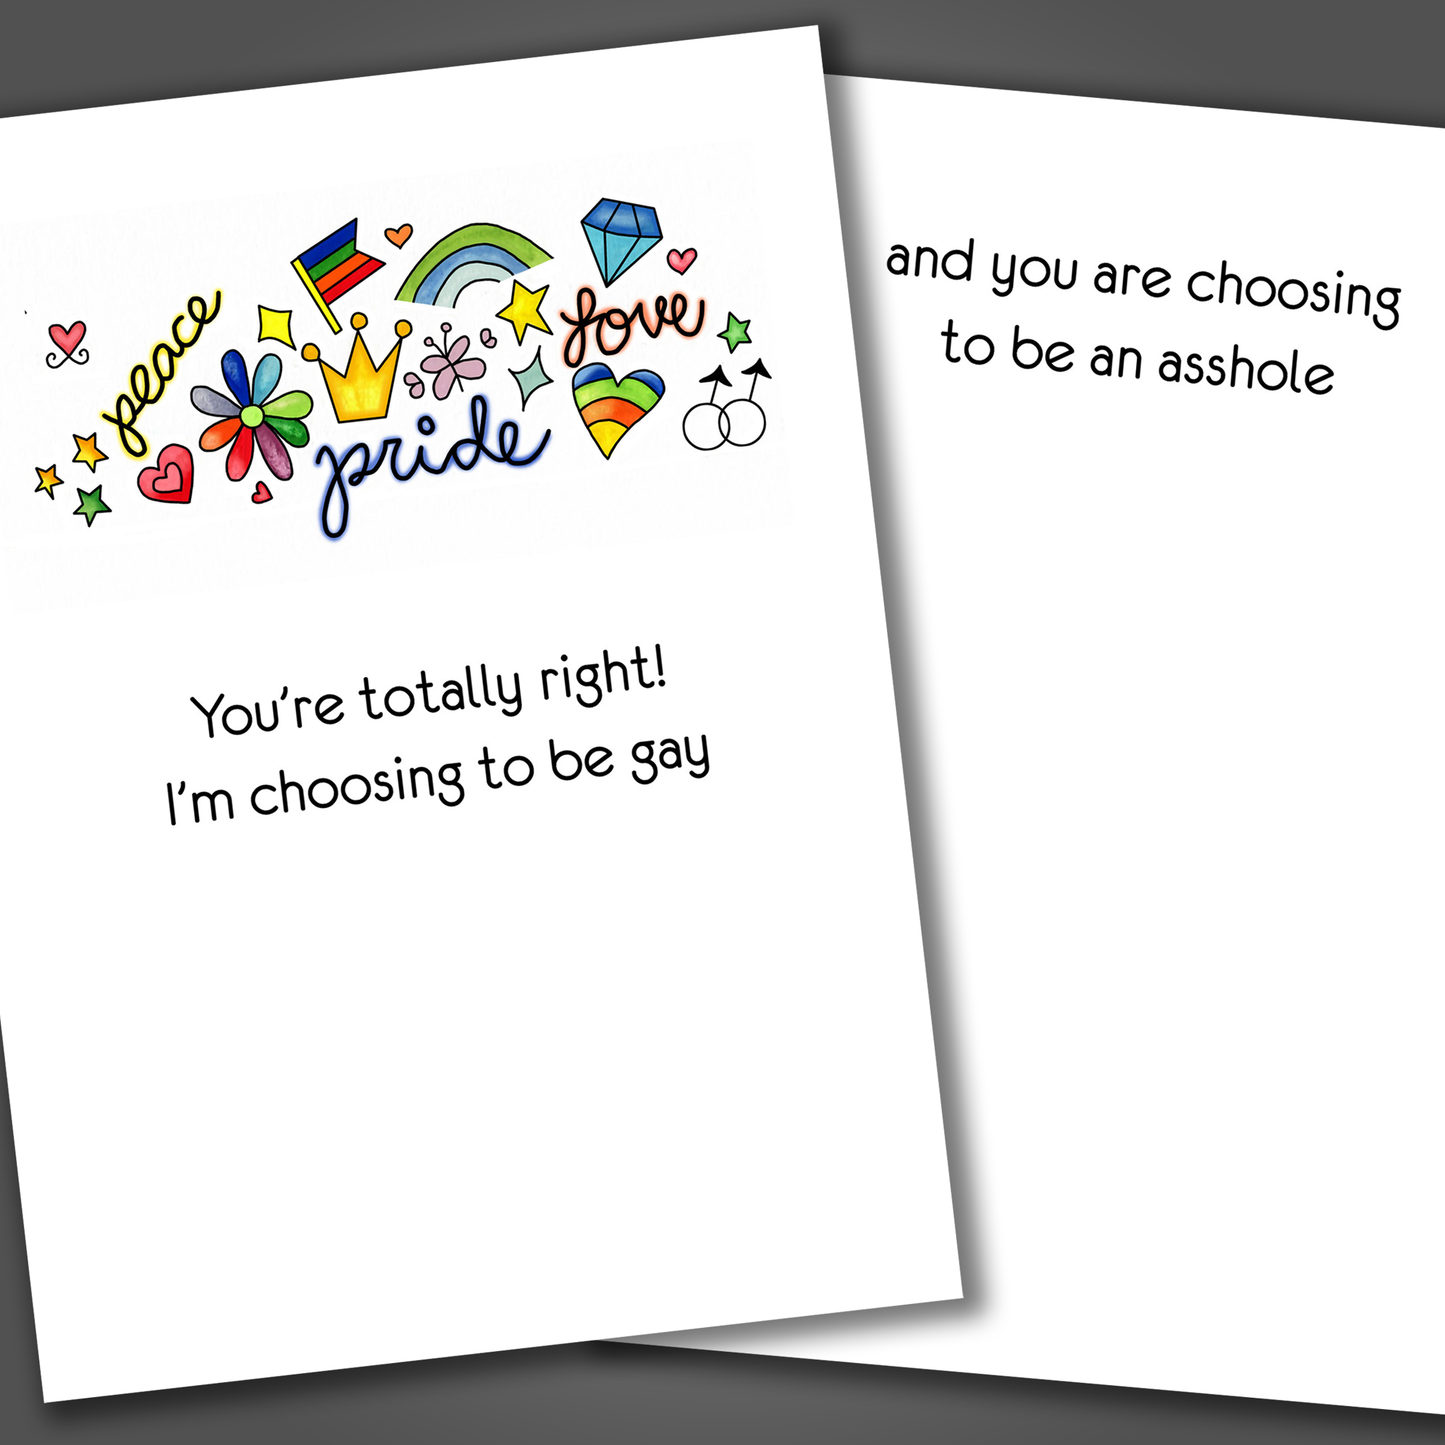 Funny gay pride card with a rainbow flag and the words pride and love drawn on the front of the card. Inside the card is a funny joke that makes fun of the recipient.